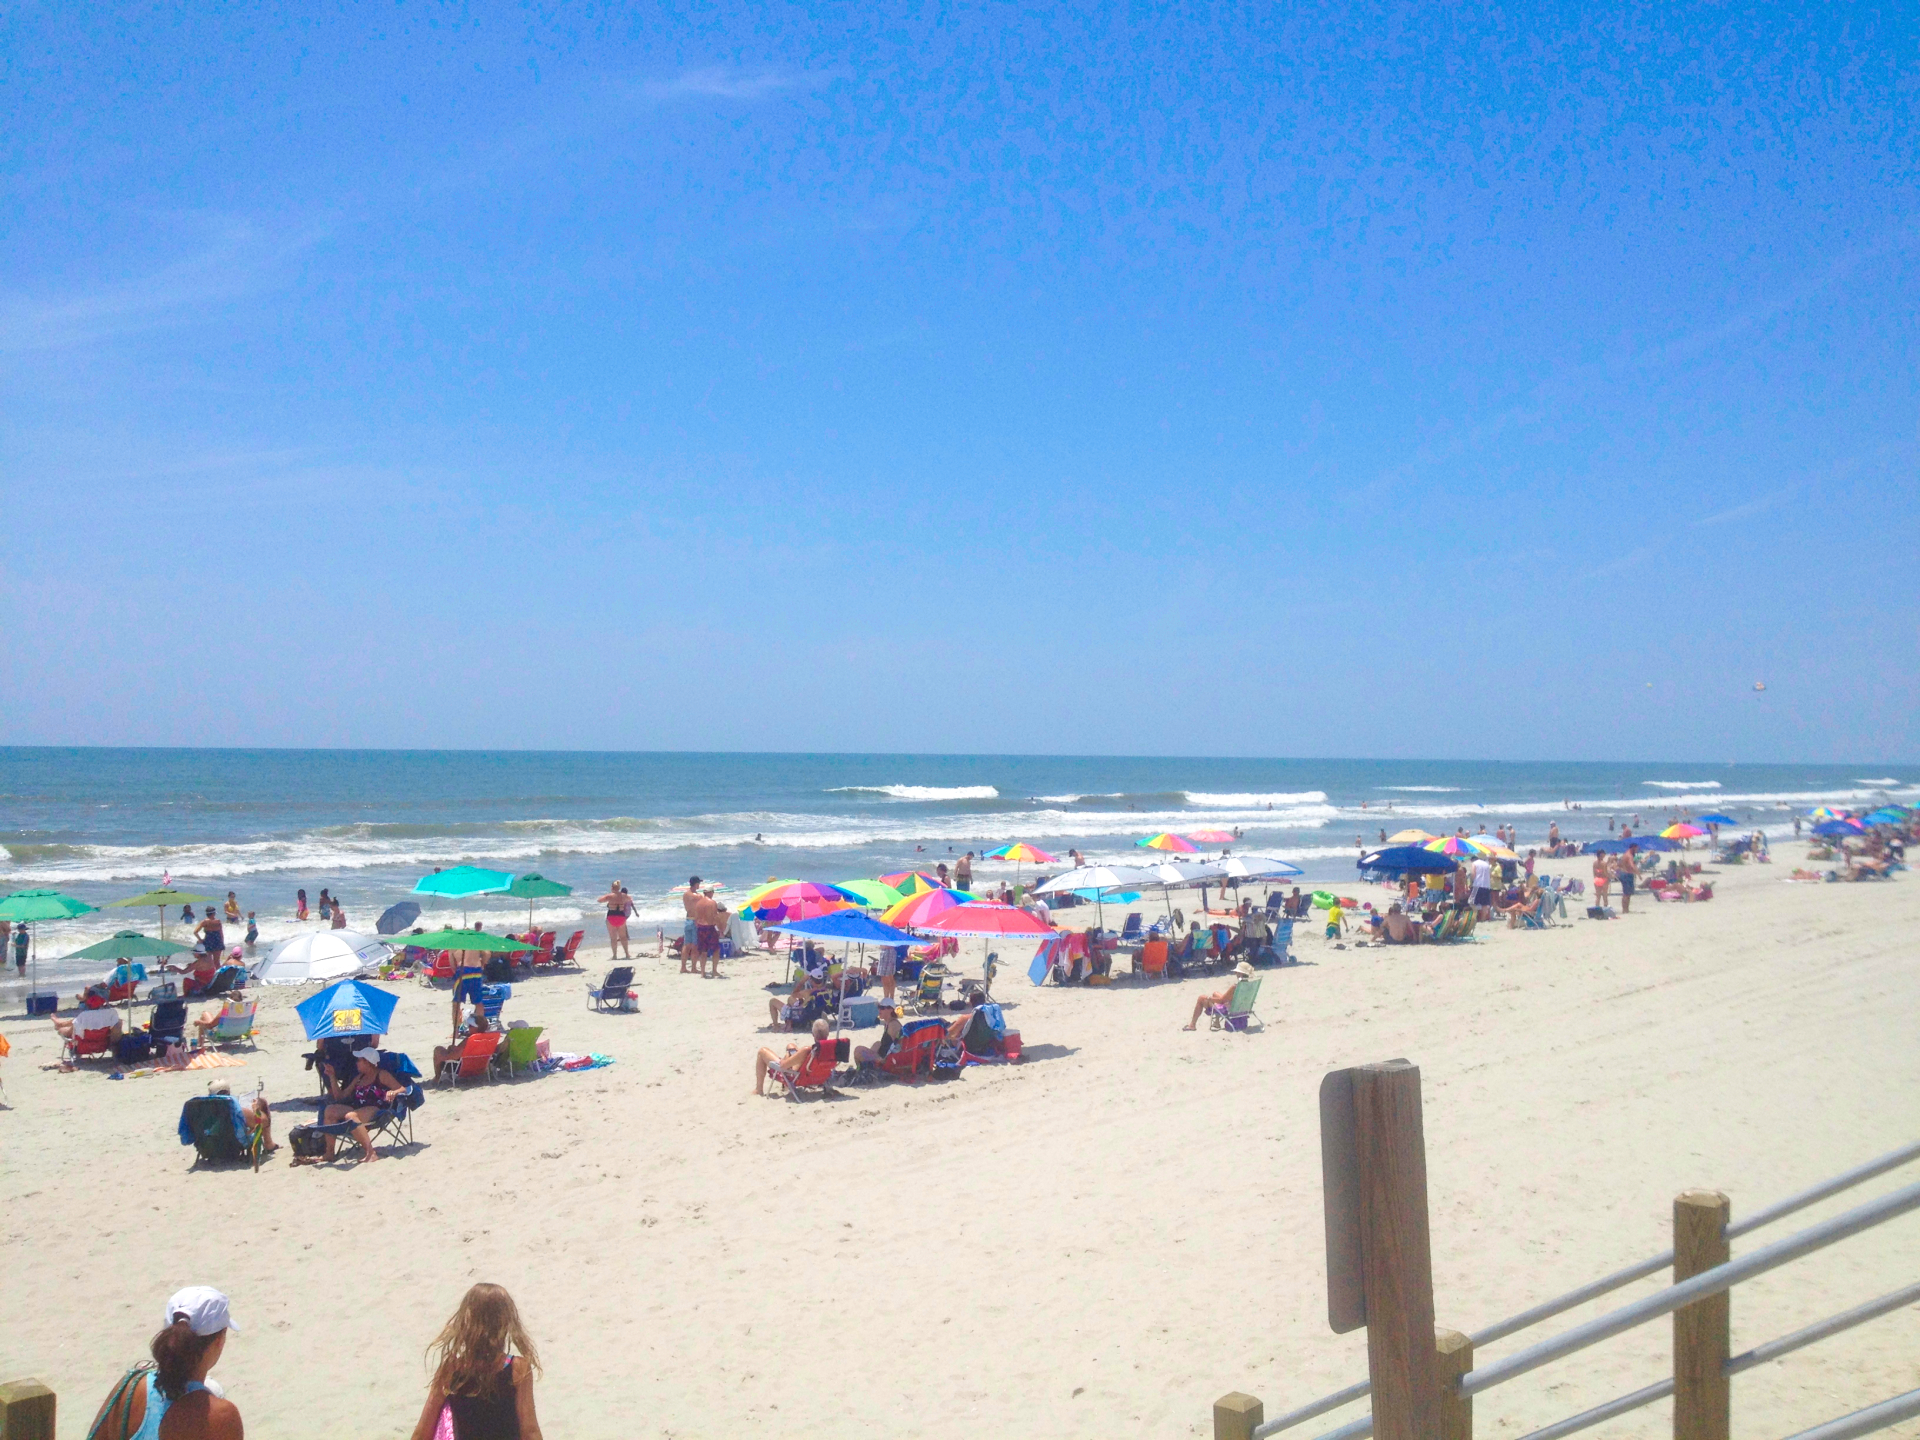 North Myrtle Beach on a Budget: Unforgettable Fun Without the Price Tag